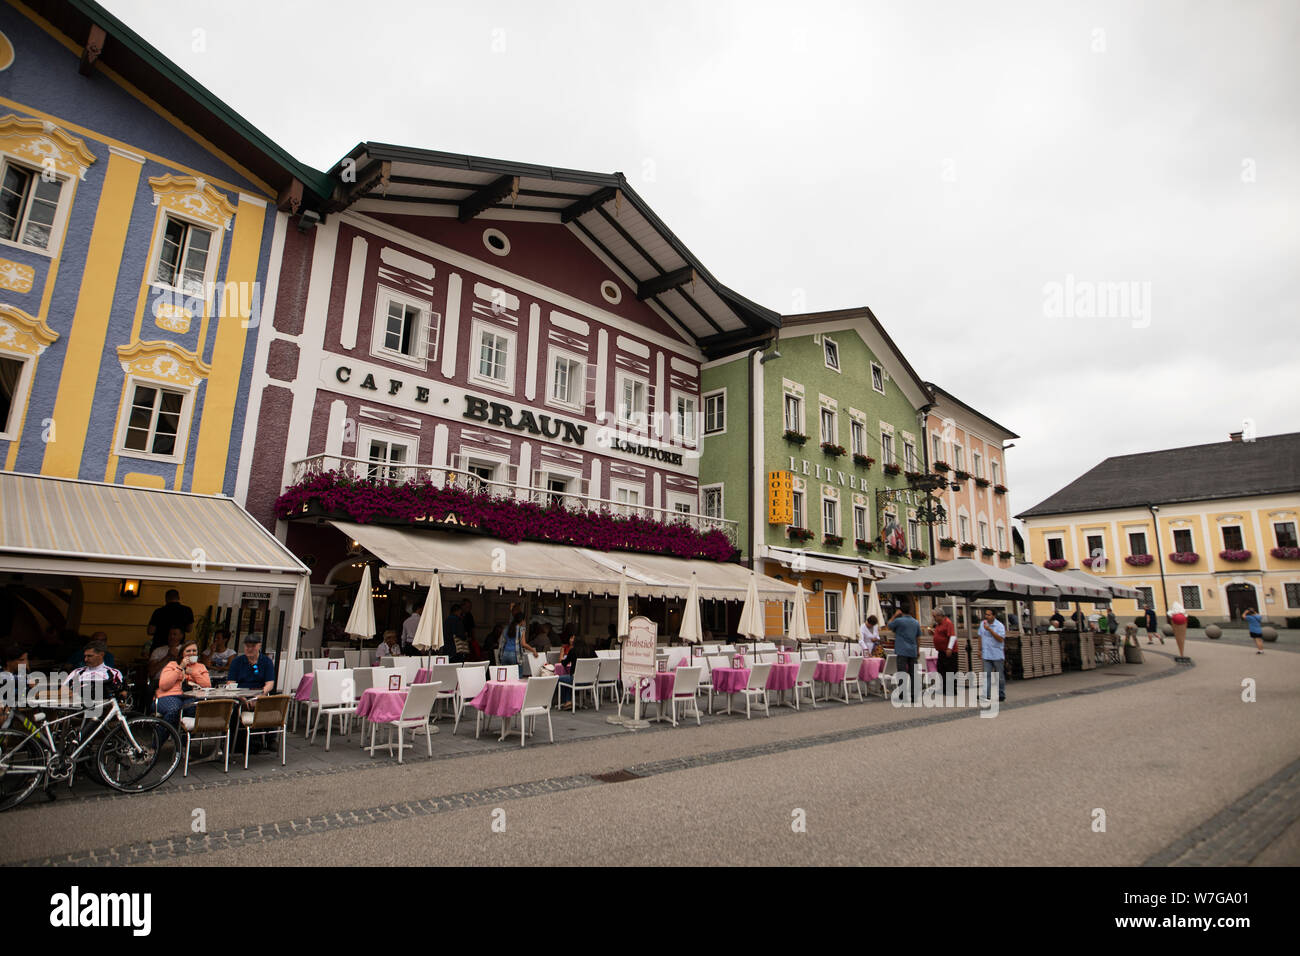 The Cafe Braun and other restaurants line the Marktplatz in the town of Mondsee, Austria. Stock Photo